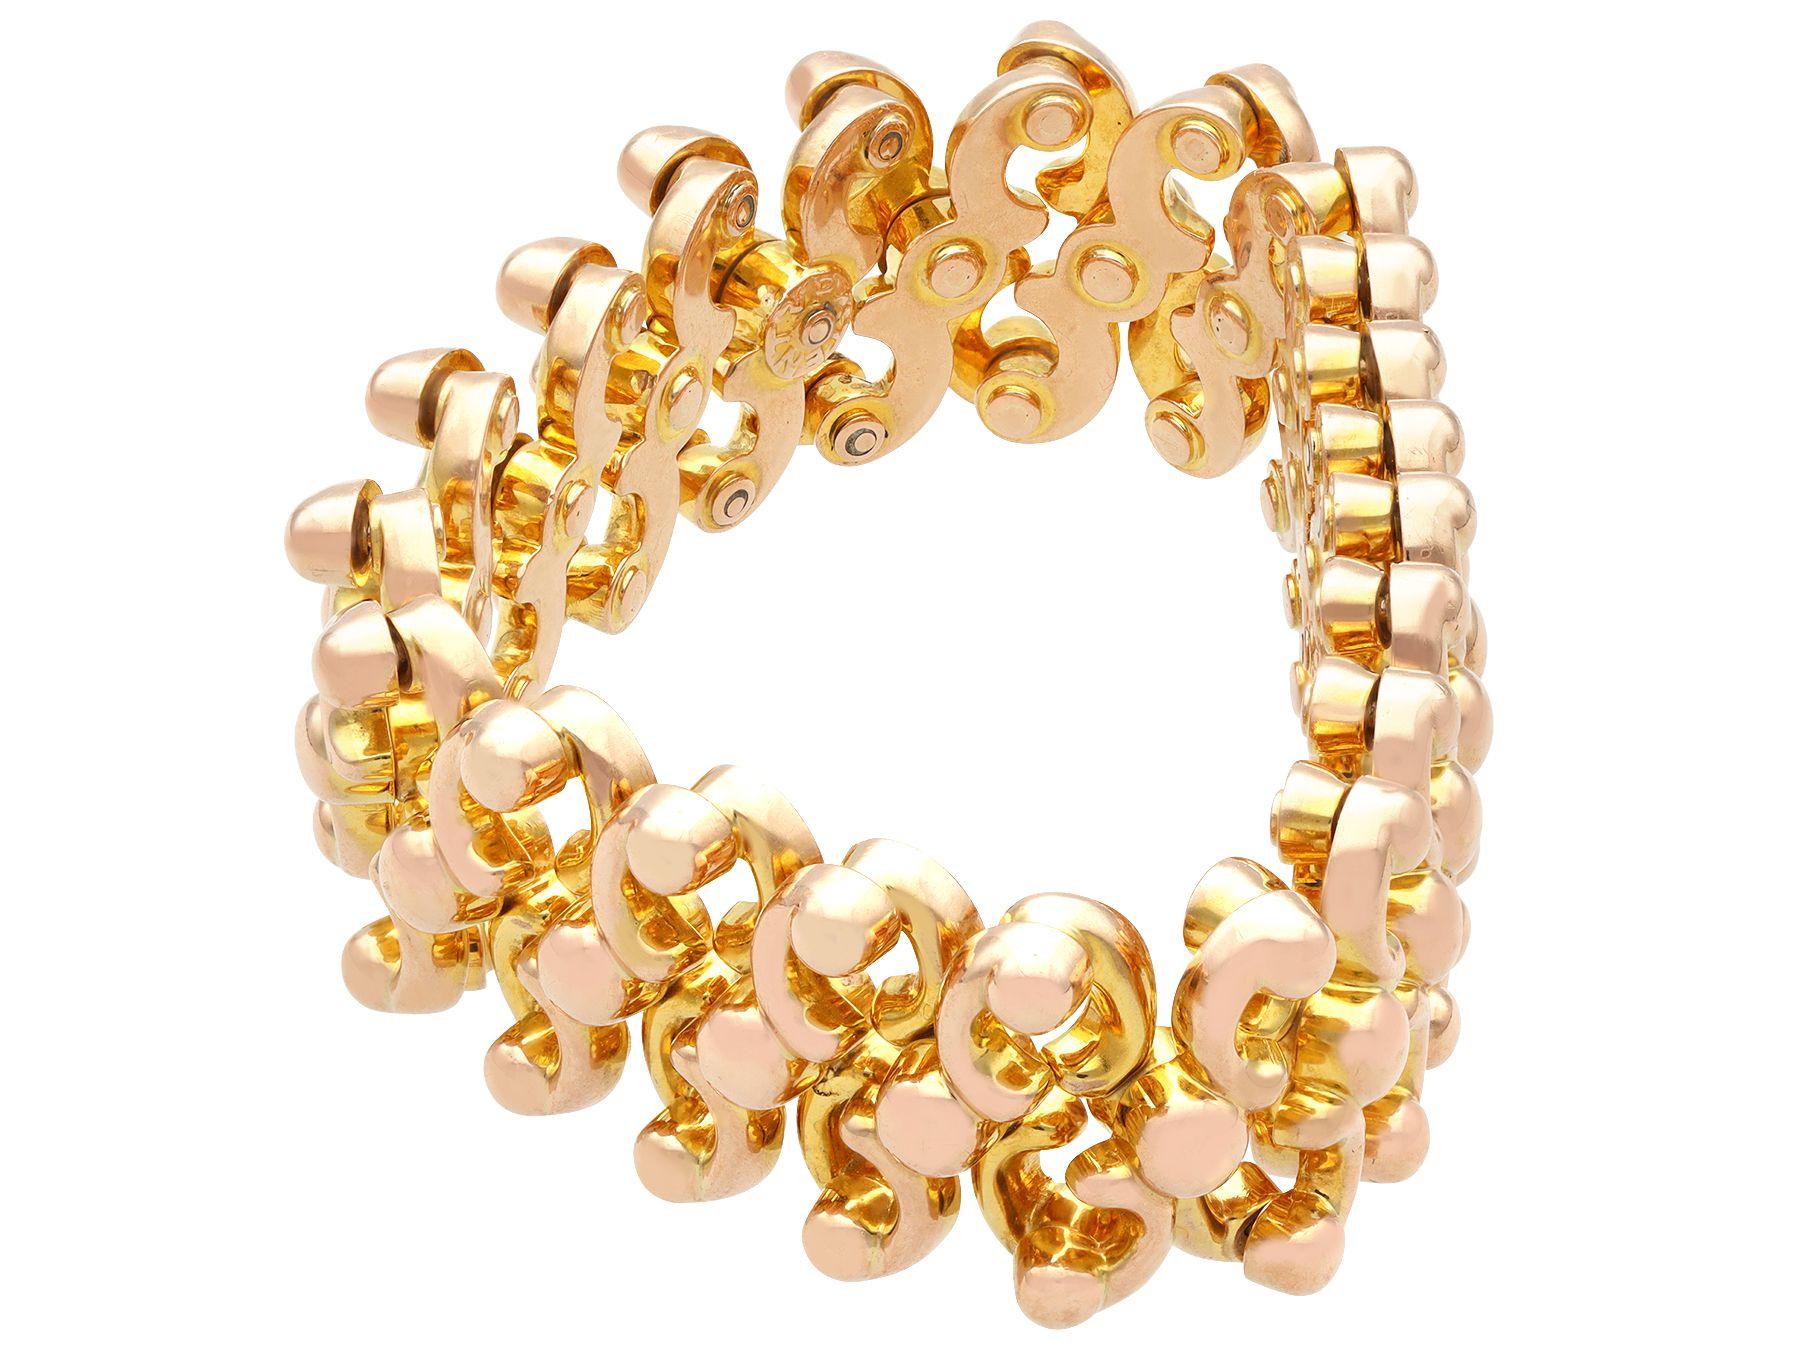 Antique Yellow and Rose Gold Expandable Bracelet In Excellent Condition For Sale In Jesmond, Newcastle Upon Tyne